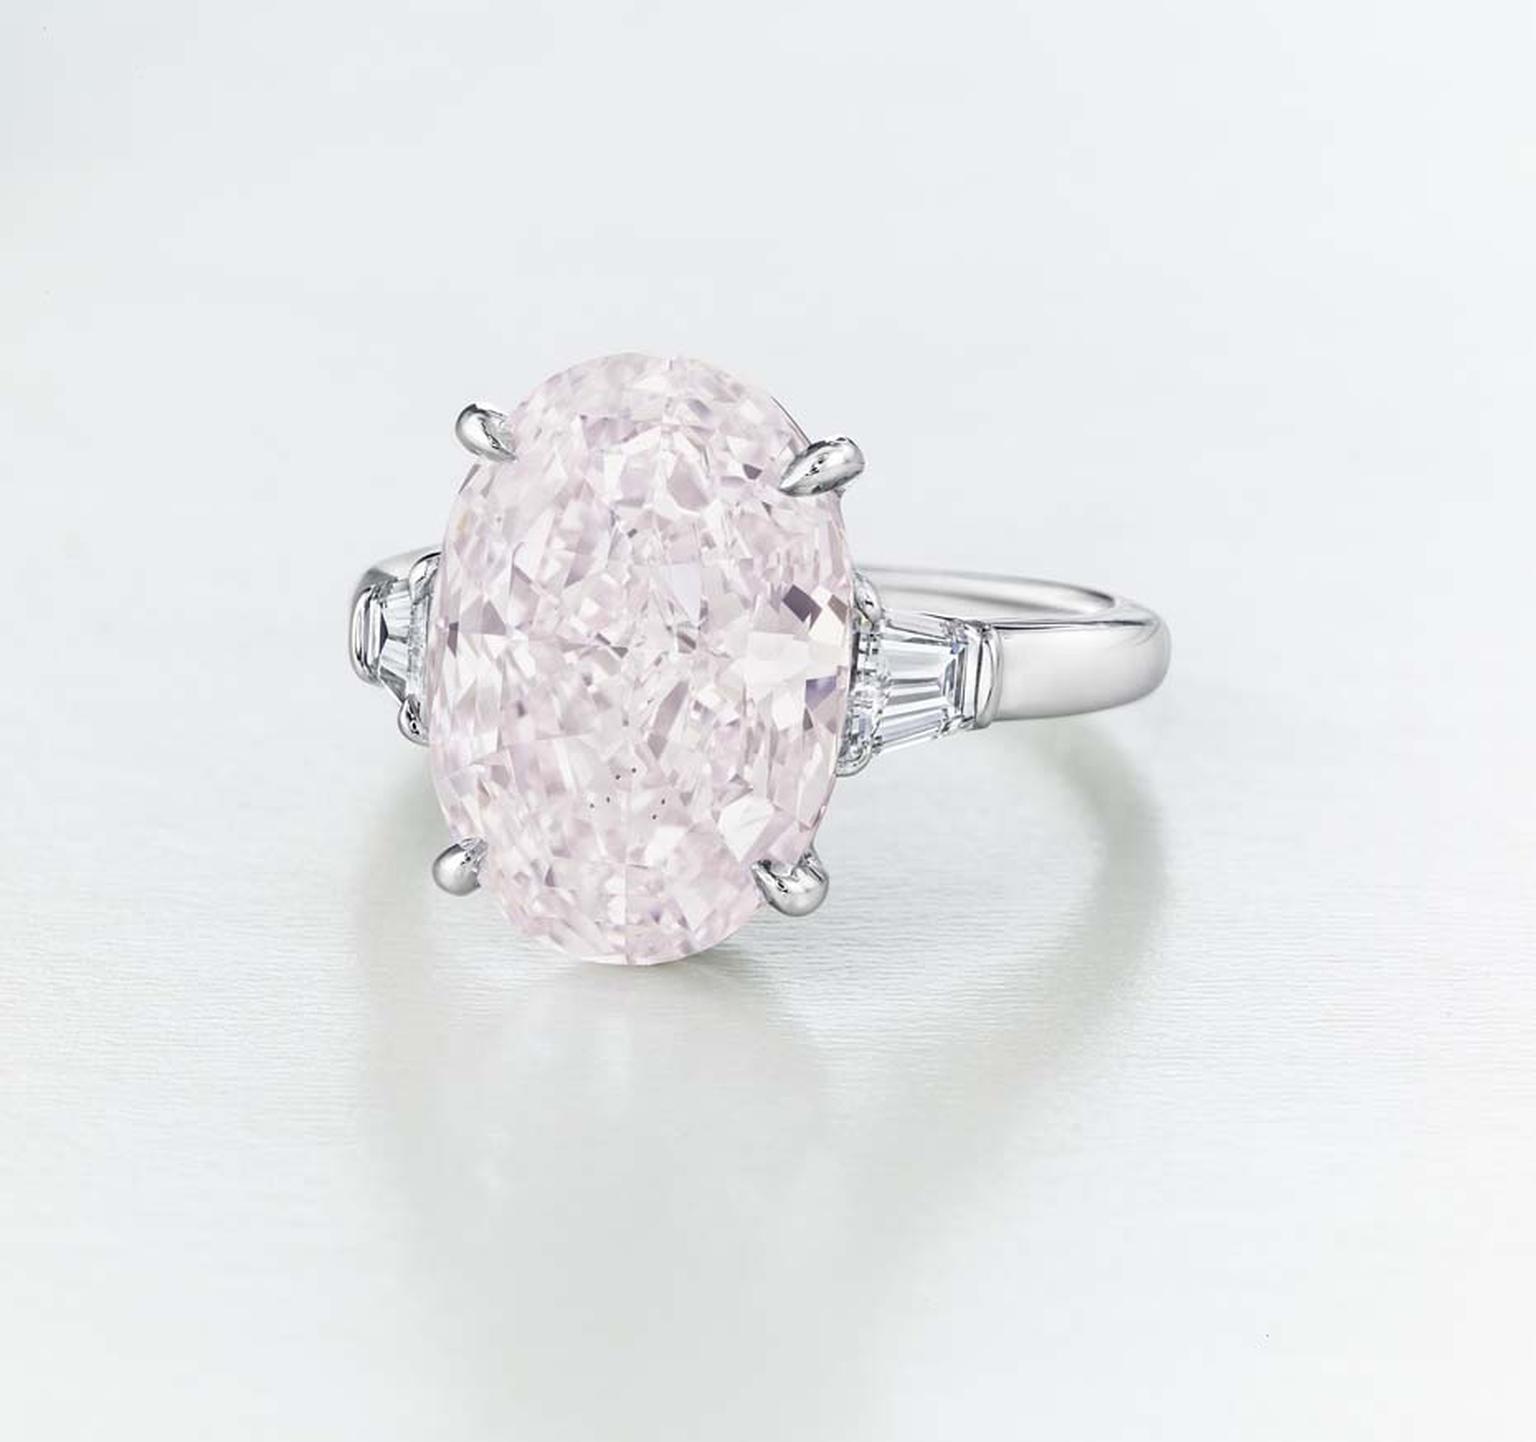 Pink and blue diamonds were among the most bid items at Christie's New York Magnificent Jewels sale, like this oval-cut pink diamond ring.